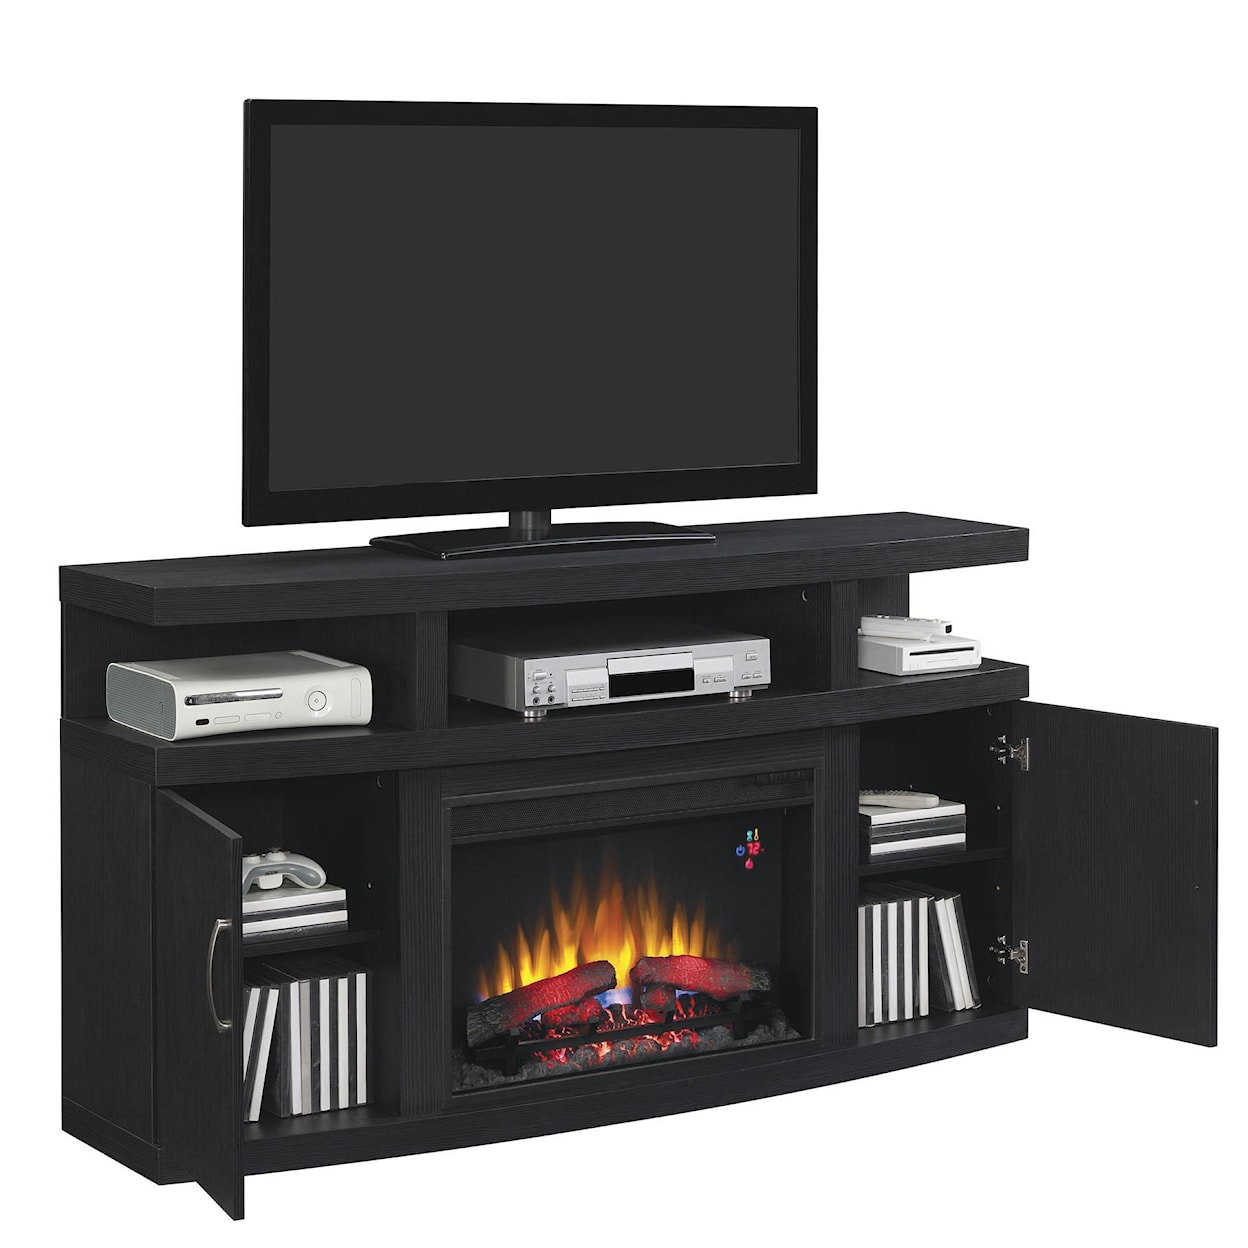 ClassicFlame Cantilever Media Mantle